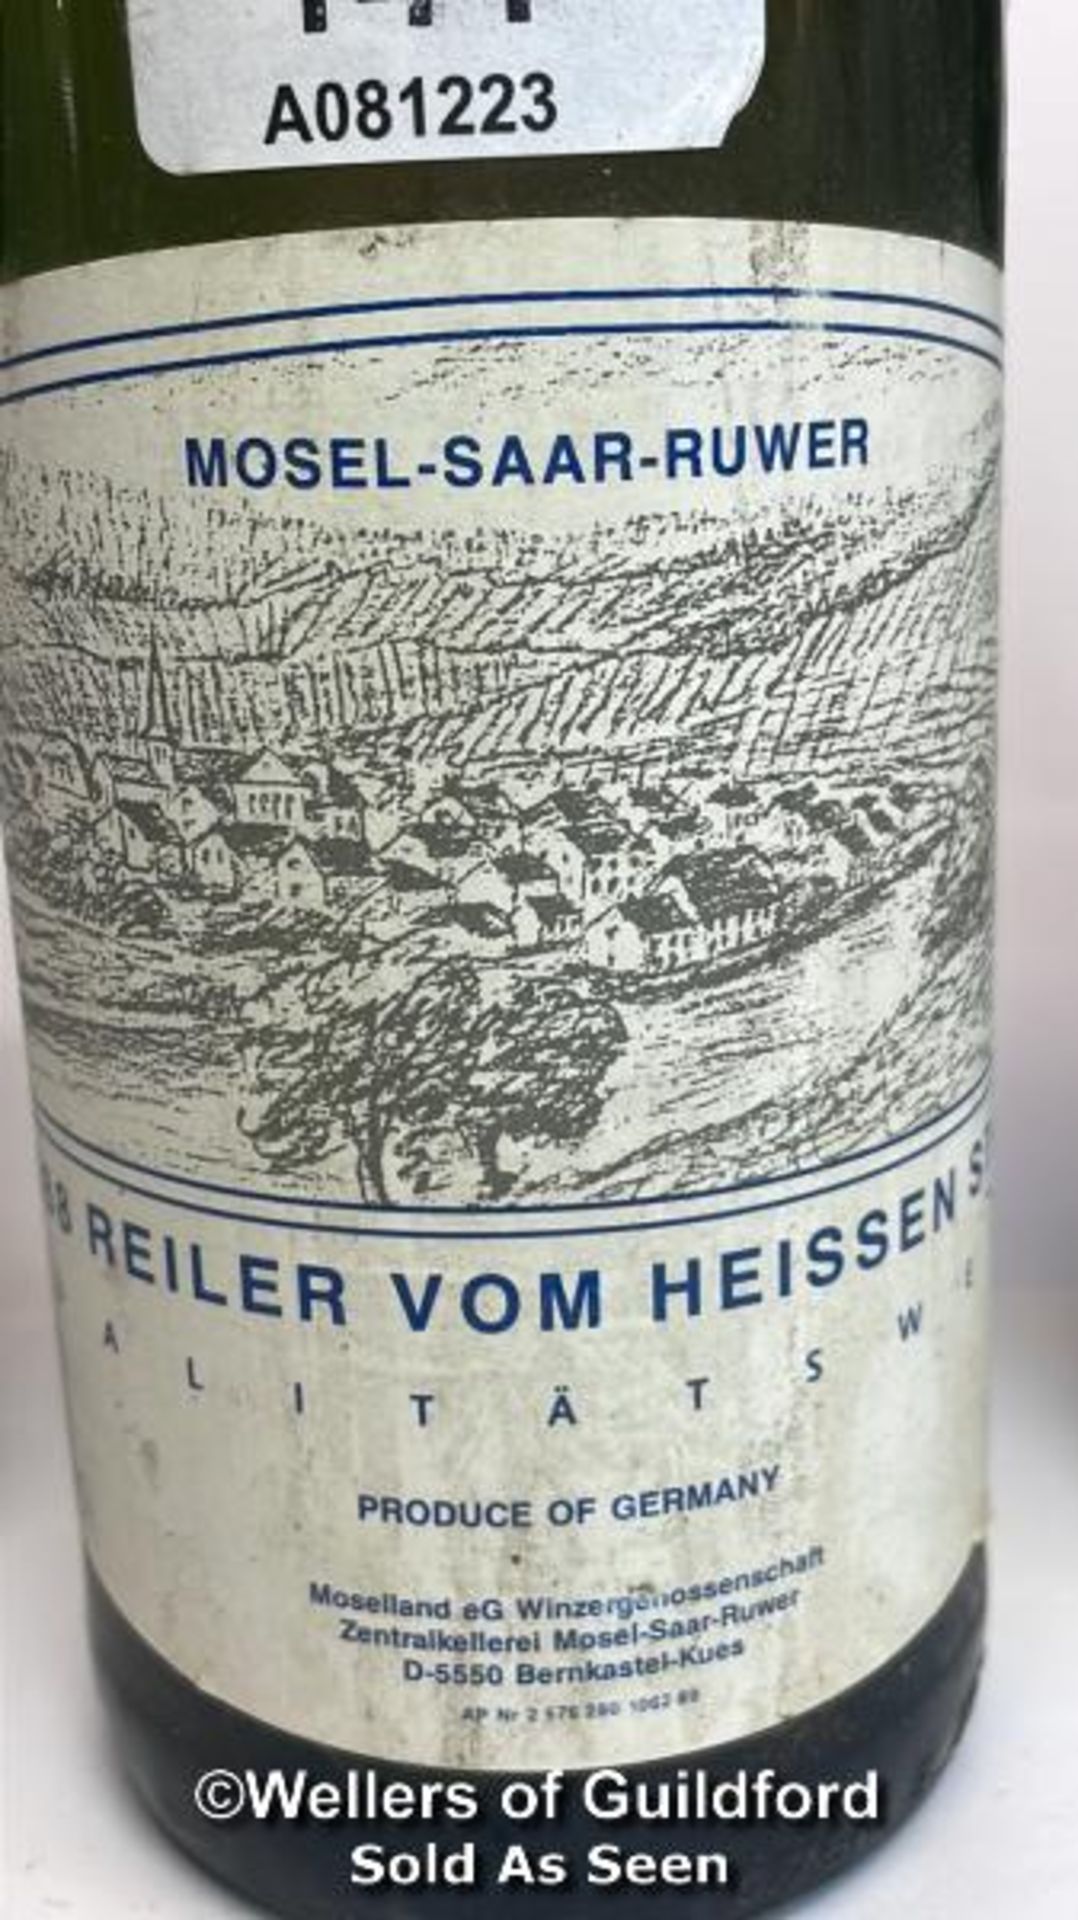 Three bottles of 1988 Reiler Vom Heissen Stein, 75cl, 9% vol / Please see images for fill level - Image 2 of 5